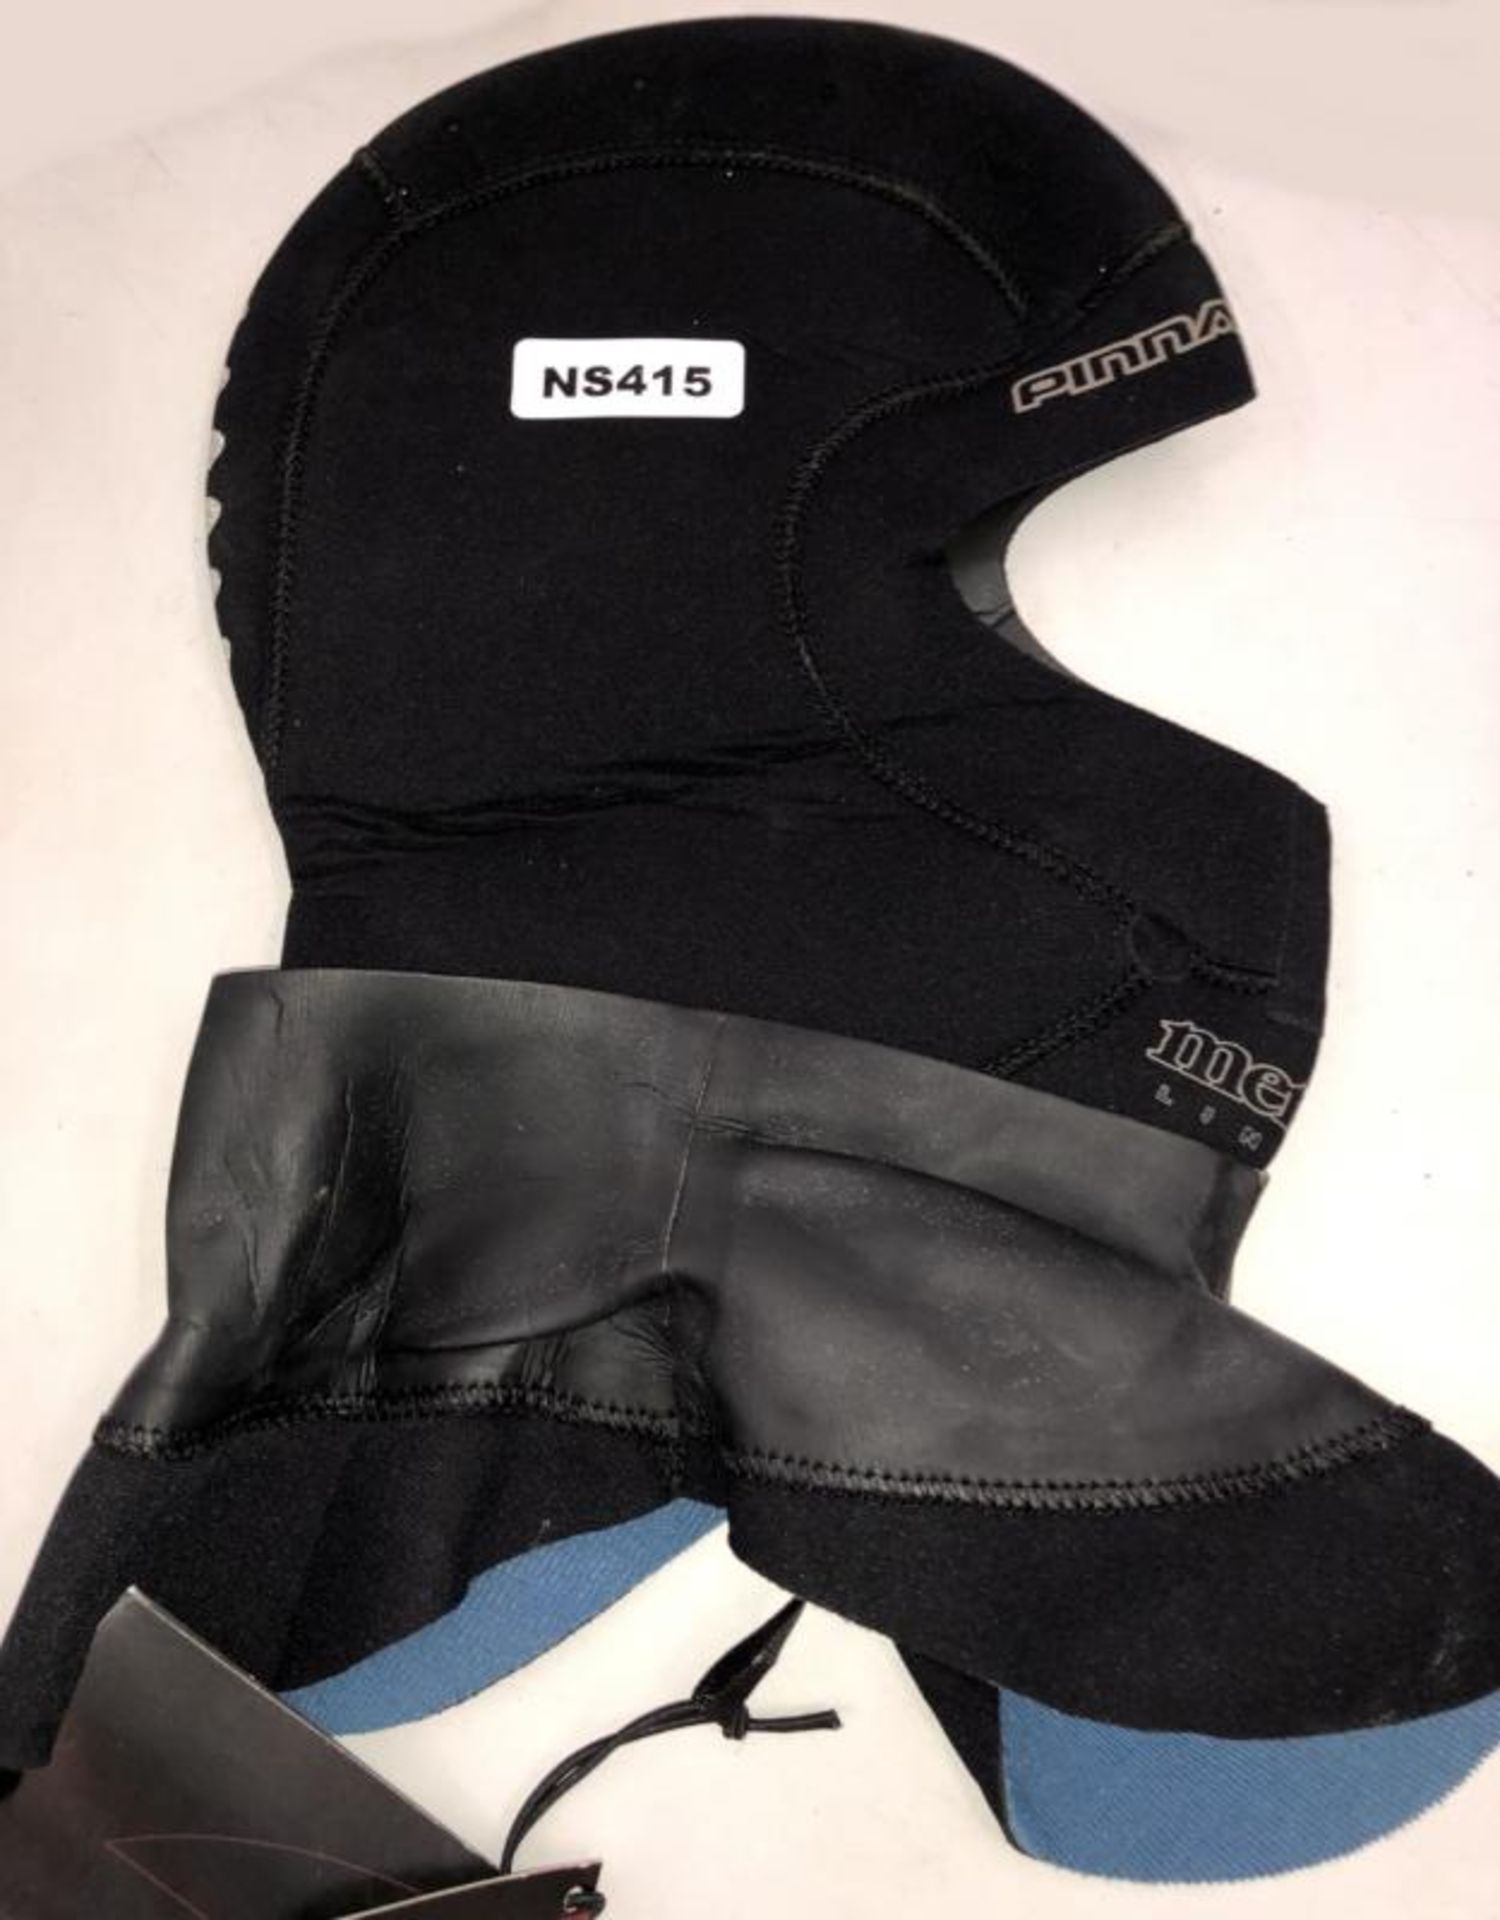 4 x Small New Diving Hoods - Ref: NS415, NS416, NS417, NS418 - CL349 - Location: Altrincham WA14 - Image 4 of 6